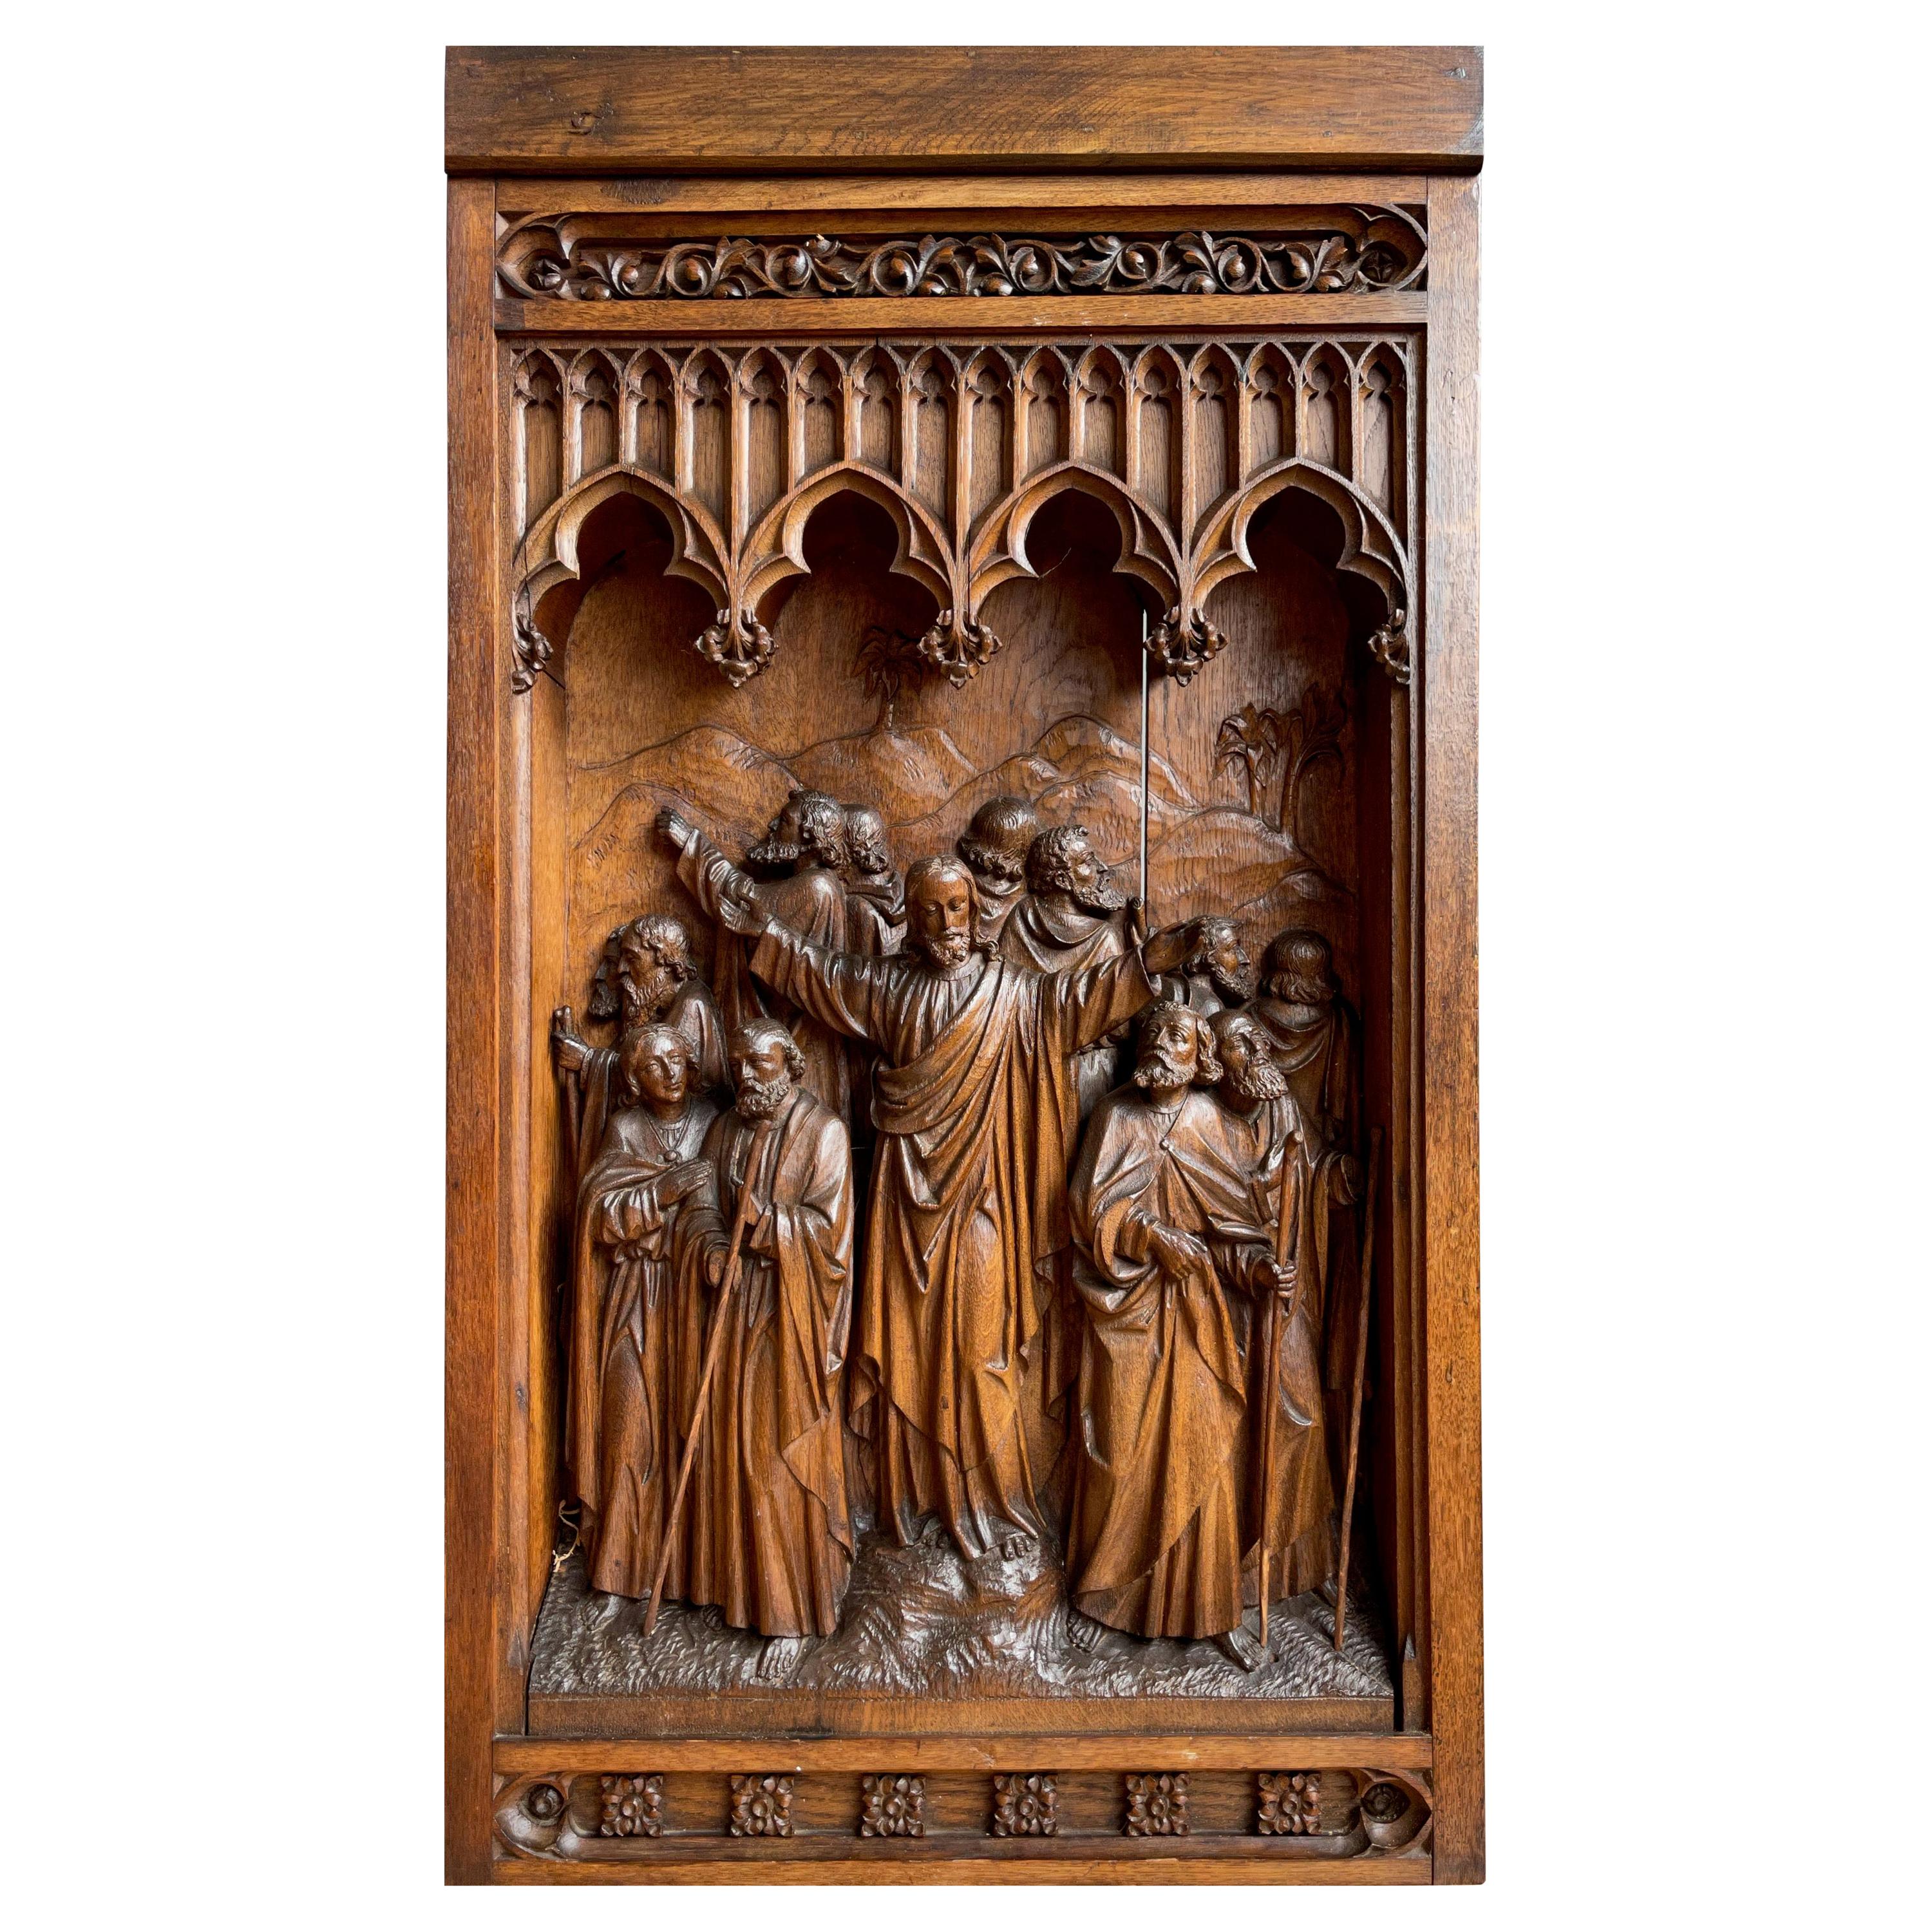 Antique Large Hand Carved Oak Gothic Art Panel, Depicting Christ and 12 Apostles